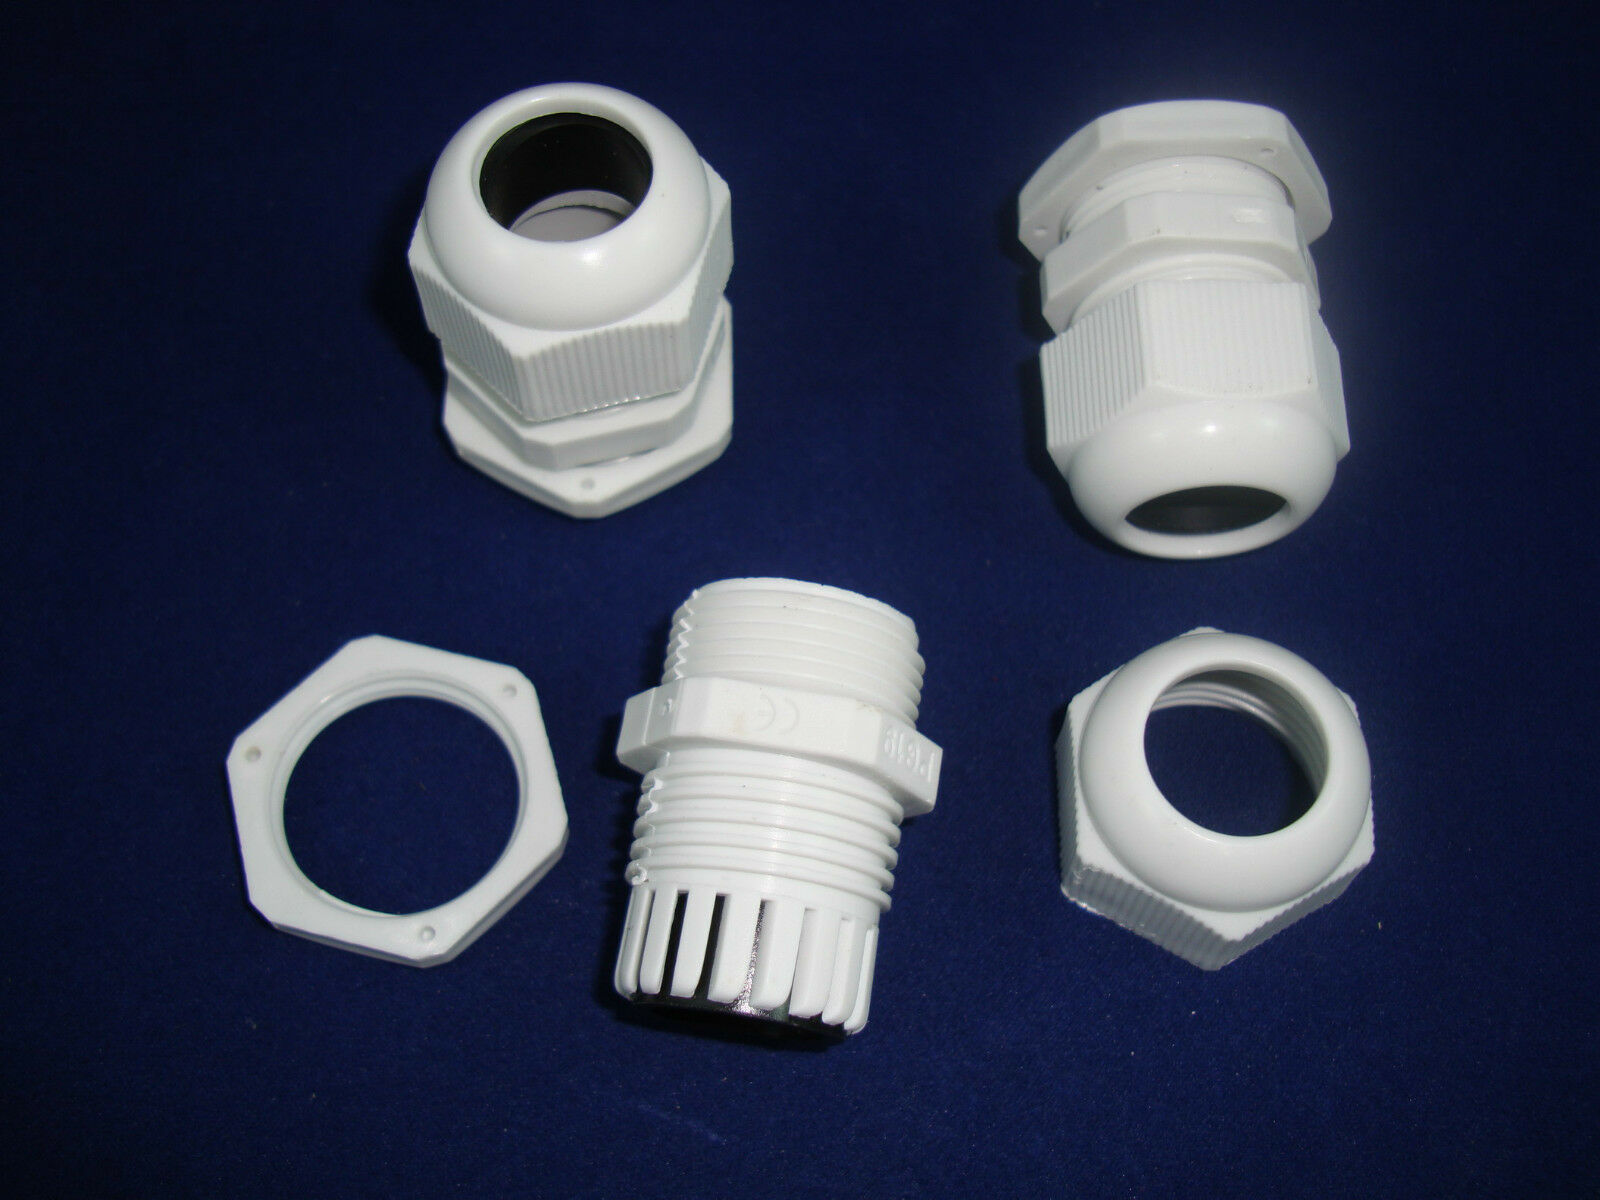  LOT OF 100PCS PG16 Waterproof  Cable Connector Gland Dia.10-14mm NYLON 66 94V-2